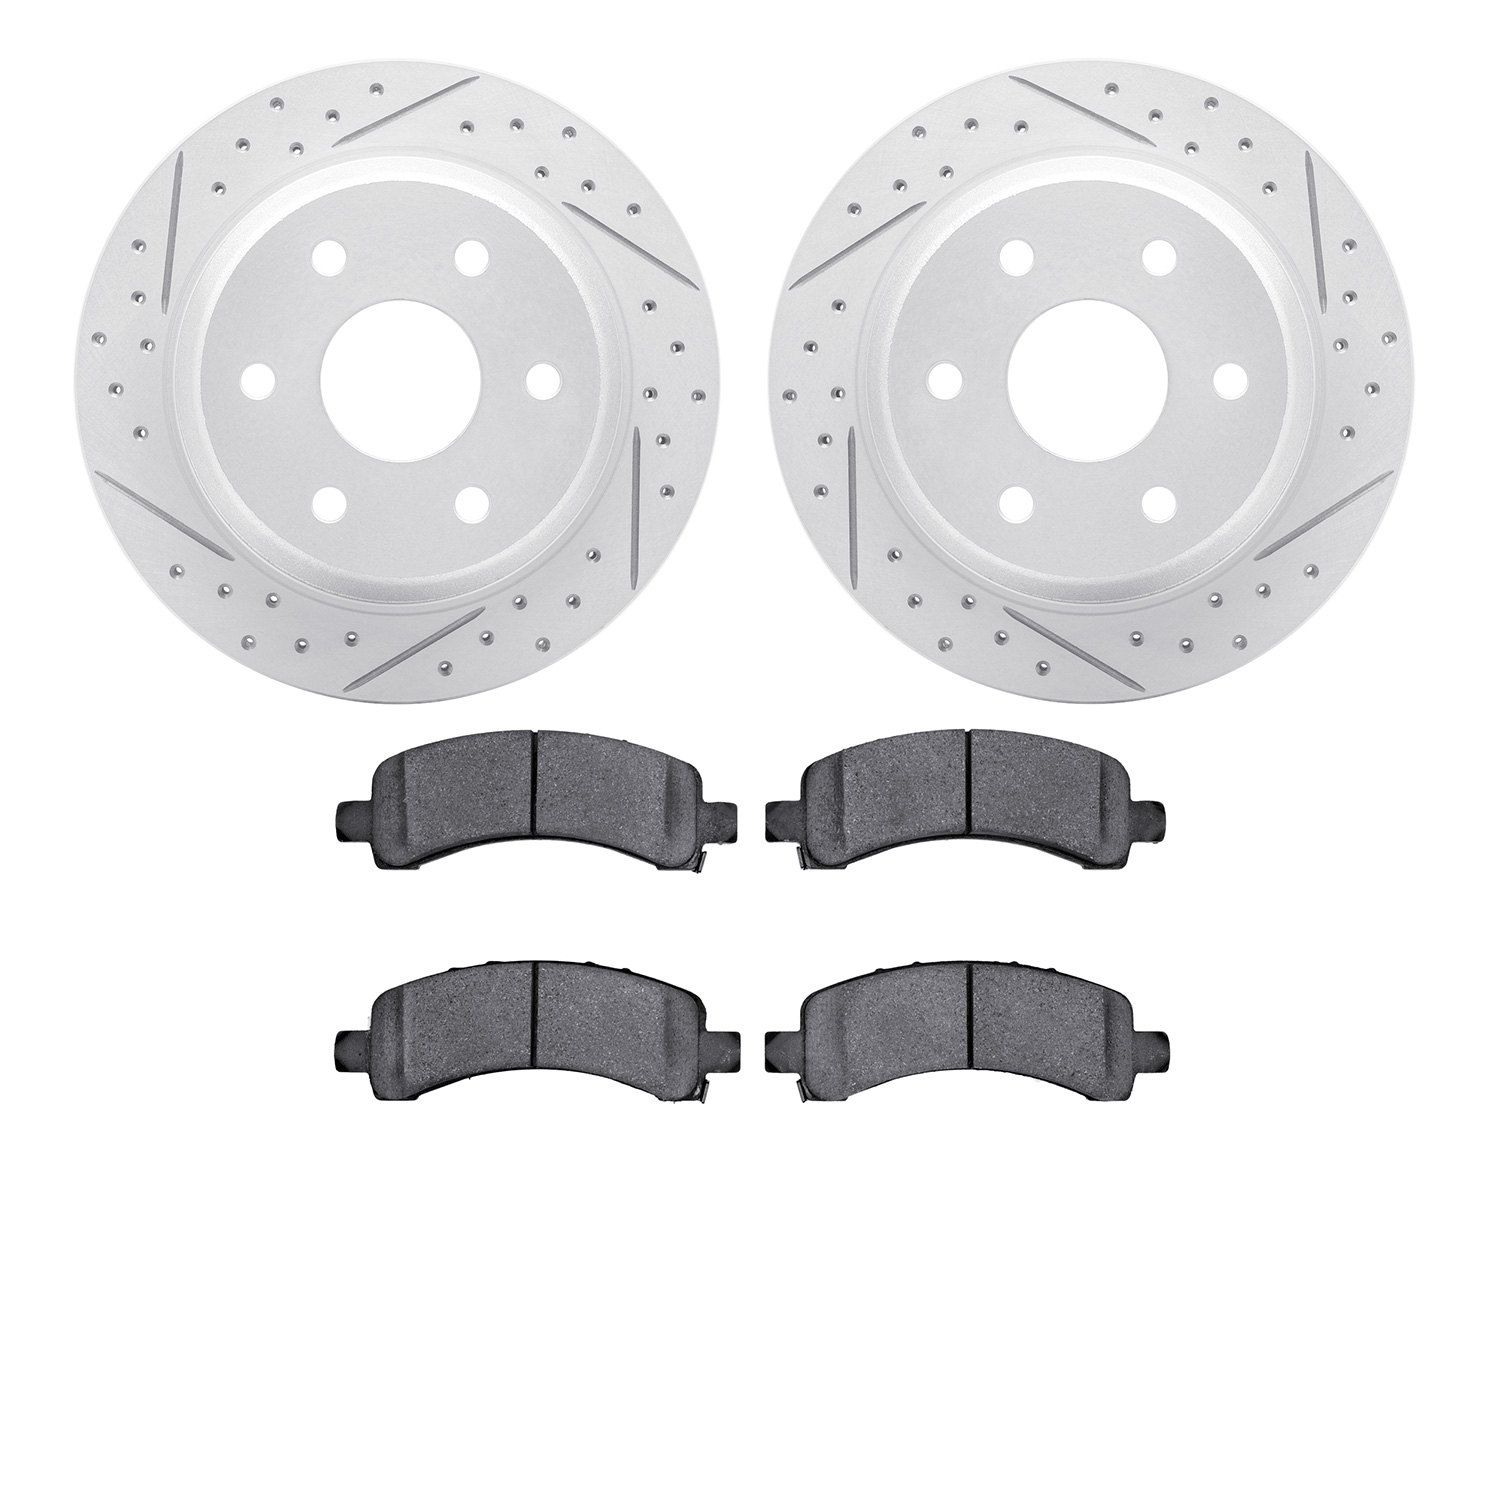 2402-48018 Geoperformance Drilled/Slotted Brake Rotors with Ultimate-Duty Brake Pads Kit, 2002-2014 GM, Position: Rear